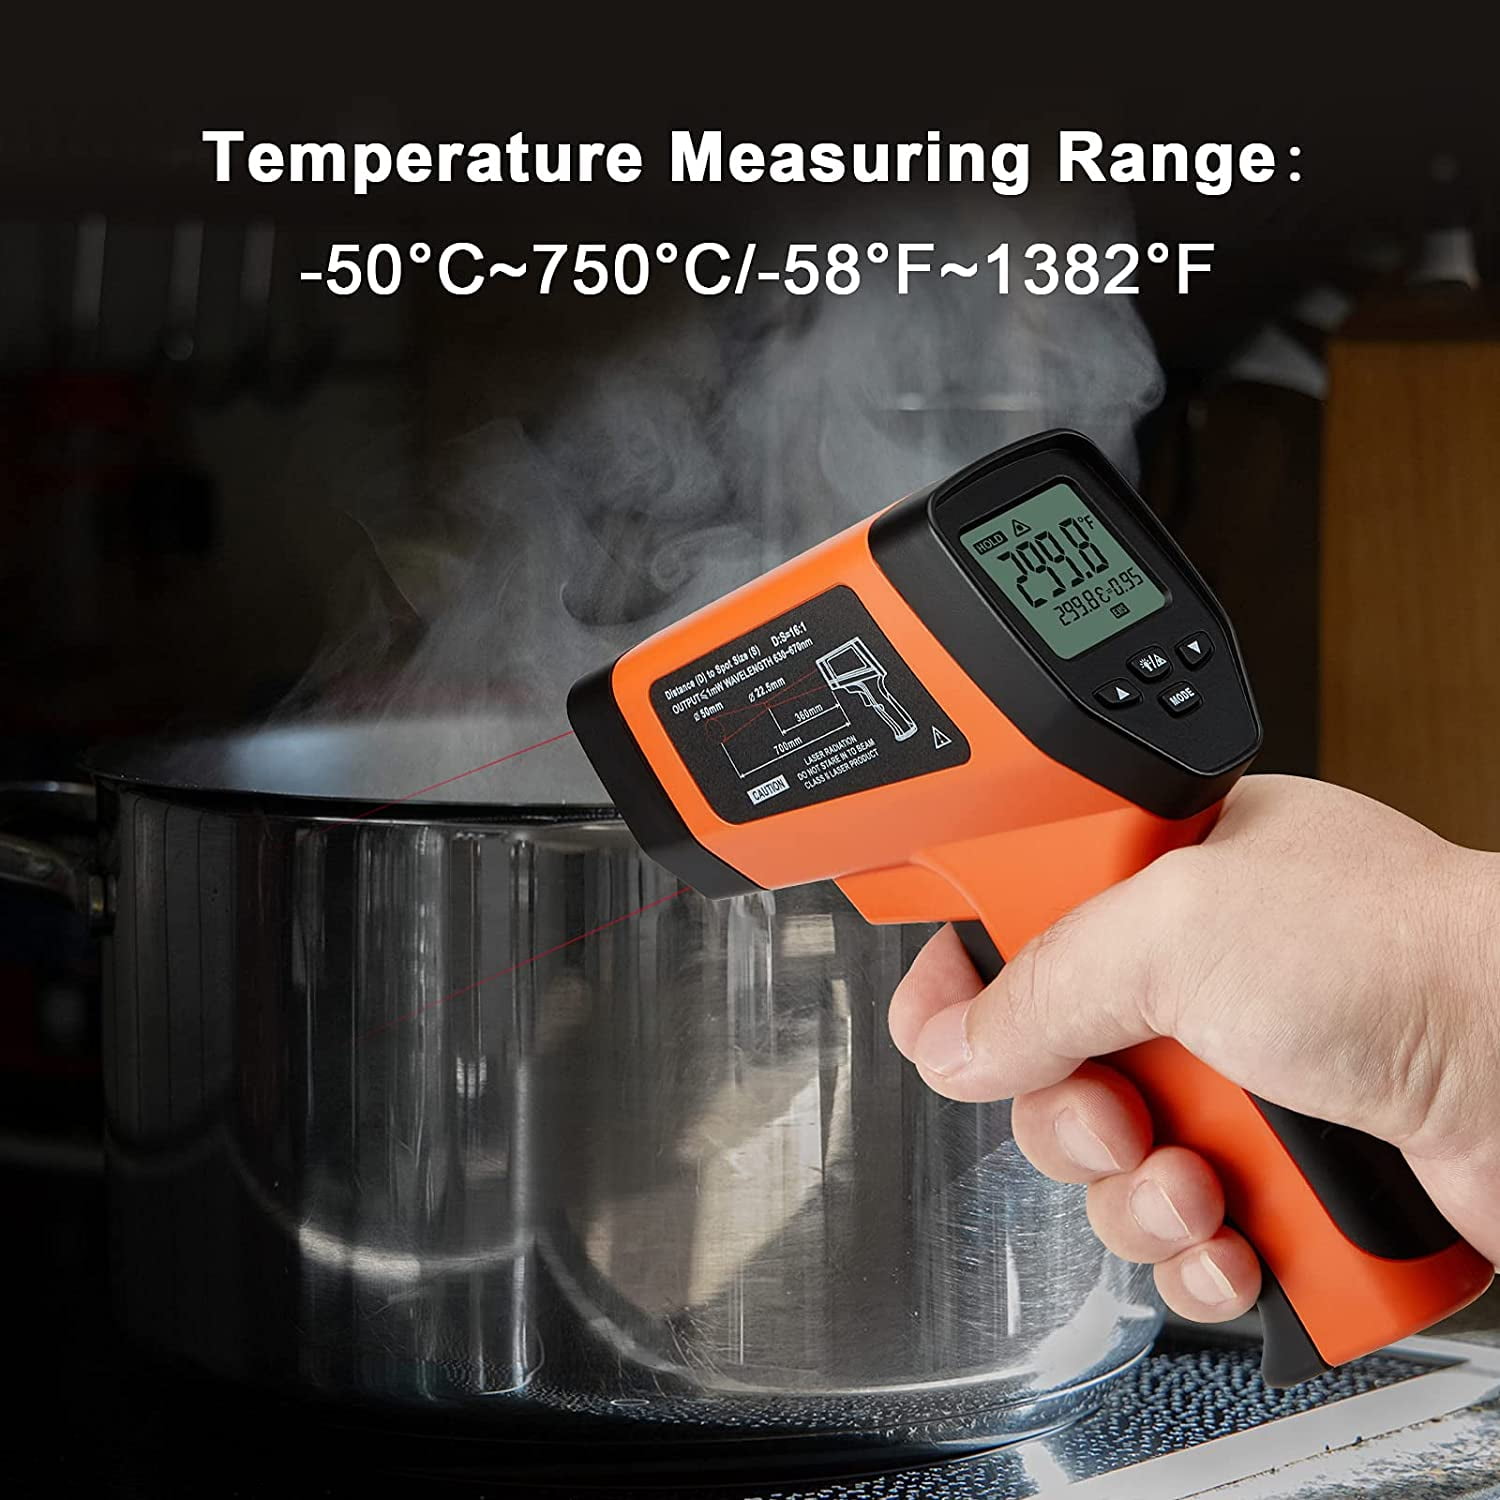 INKBIRDPLUS Temperature Gun Infrared Thermometer for Cooking, Digital Laser  Ther